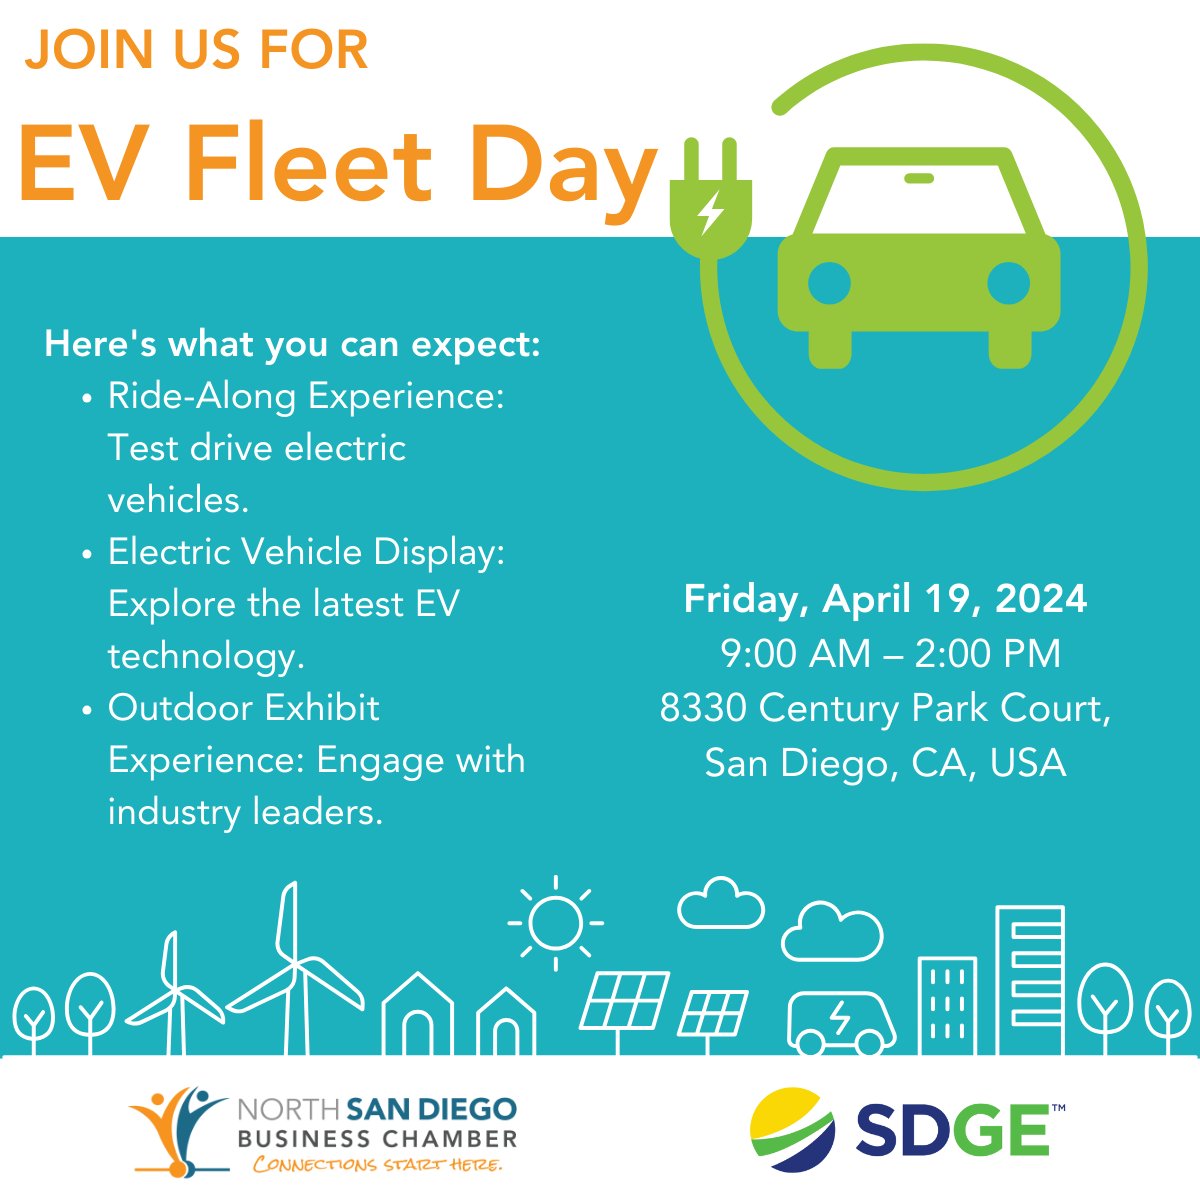 Members are invited to @SDGE EV Fleet Day on Friday, April 19!  💚 Let's build a cleaner, healthier, & more sustainable SD. Secure complimentary tix: lnkd.in/ggez933b 
*Open to Members only.

#nsdbc #sdge #evfleetday #sustainablebusiness #ecofriendlybusiness #sandiego